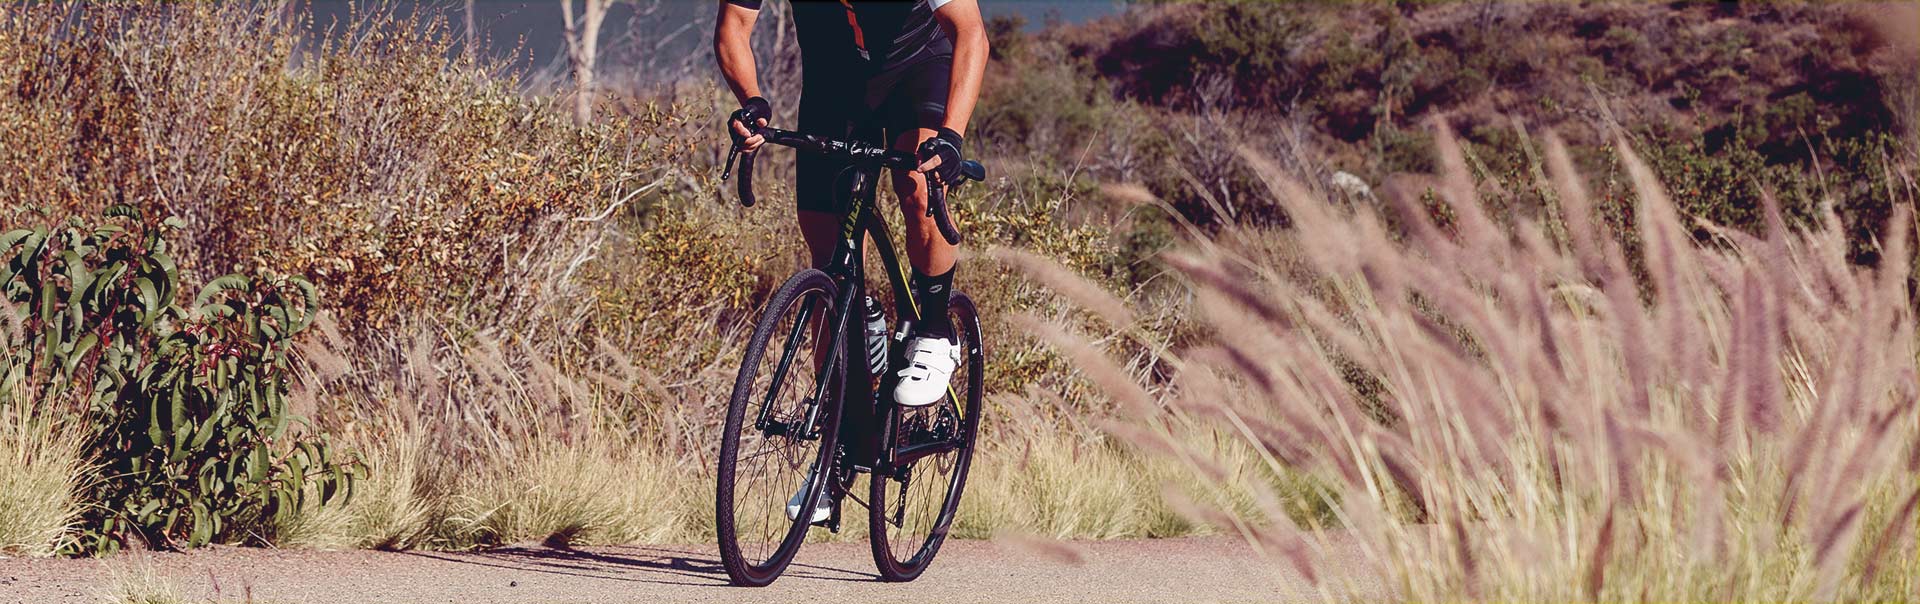 19 Anyroad Advanced Giant Bicycles Official Site